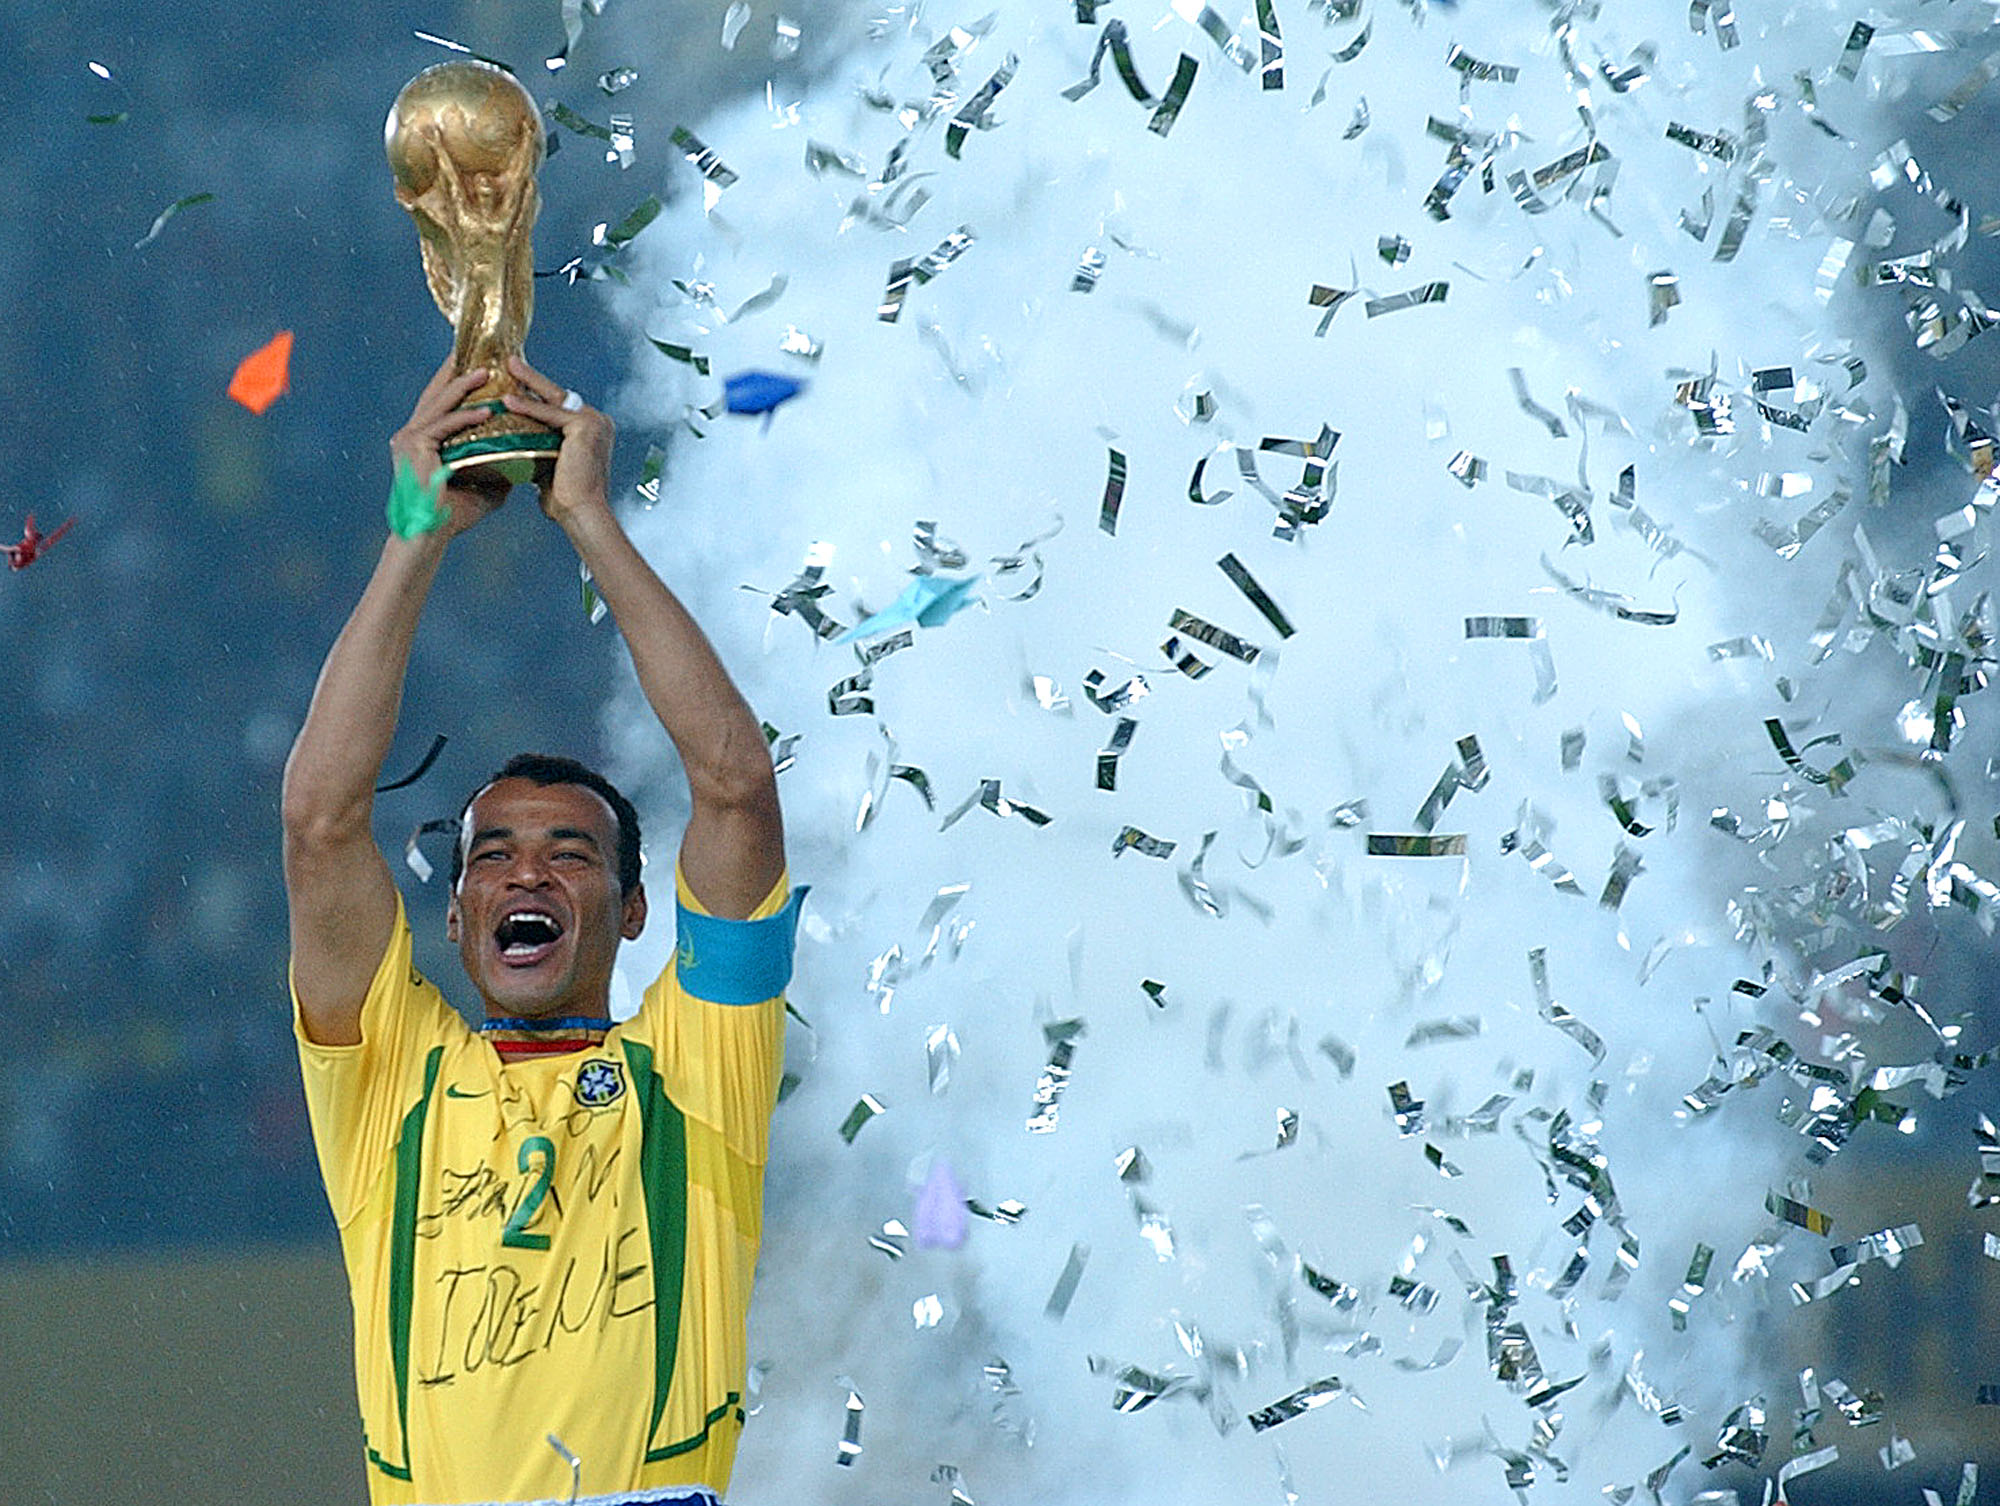 cafu-says-the-presence-of-brazilians-in-the-premier-league-prevents-them-from-winning-another-world-cup